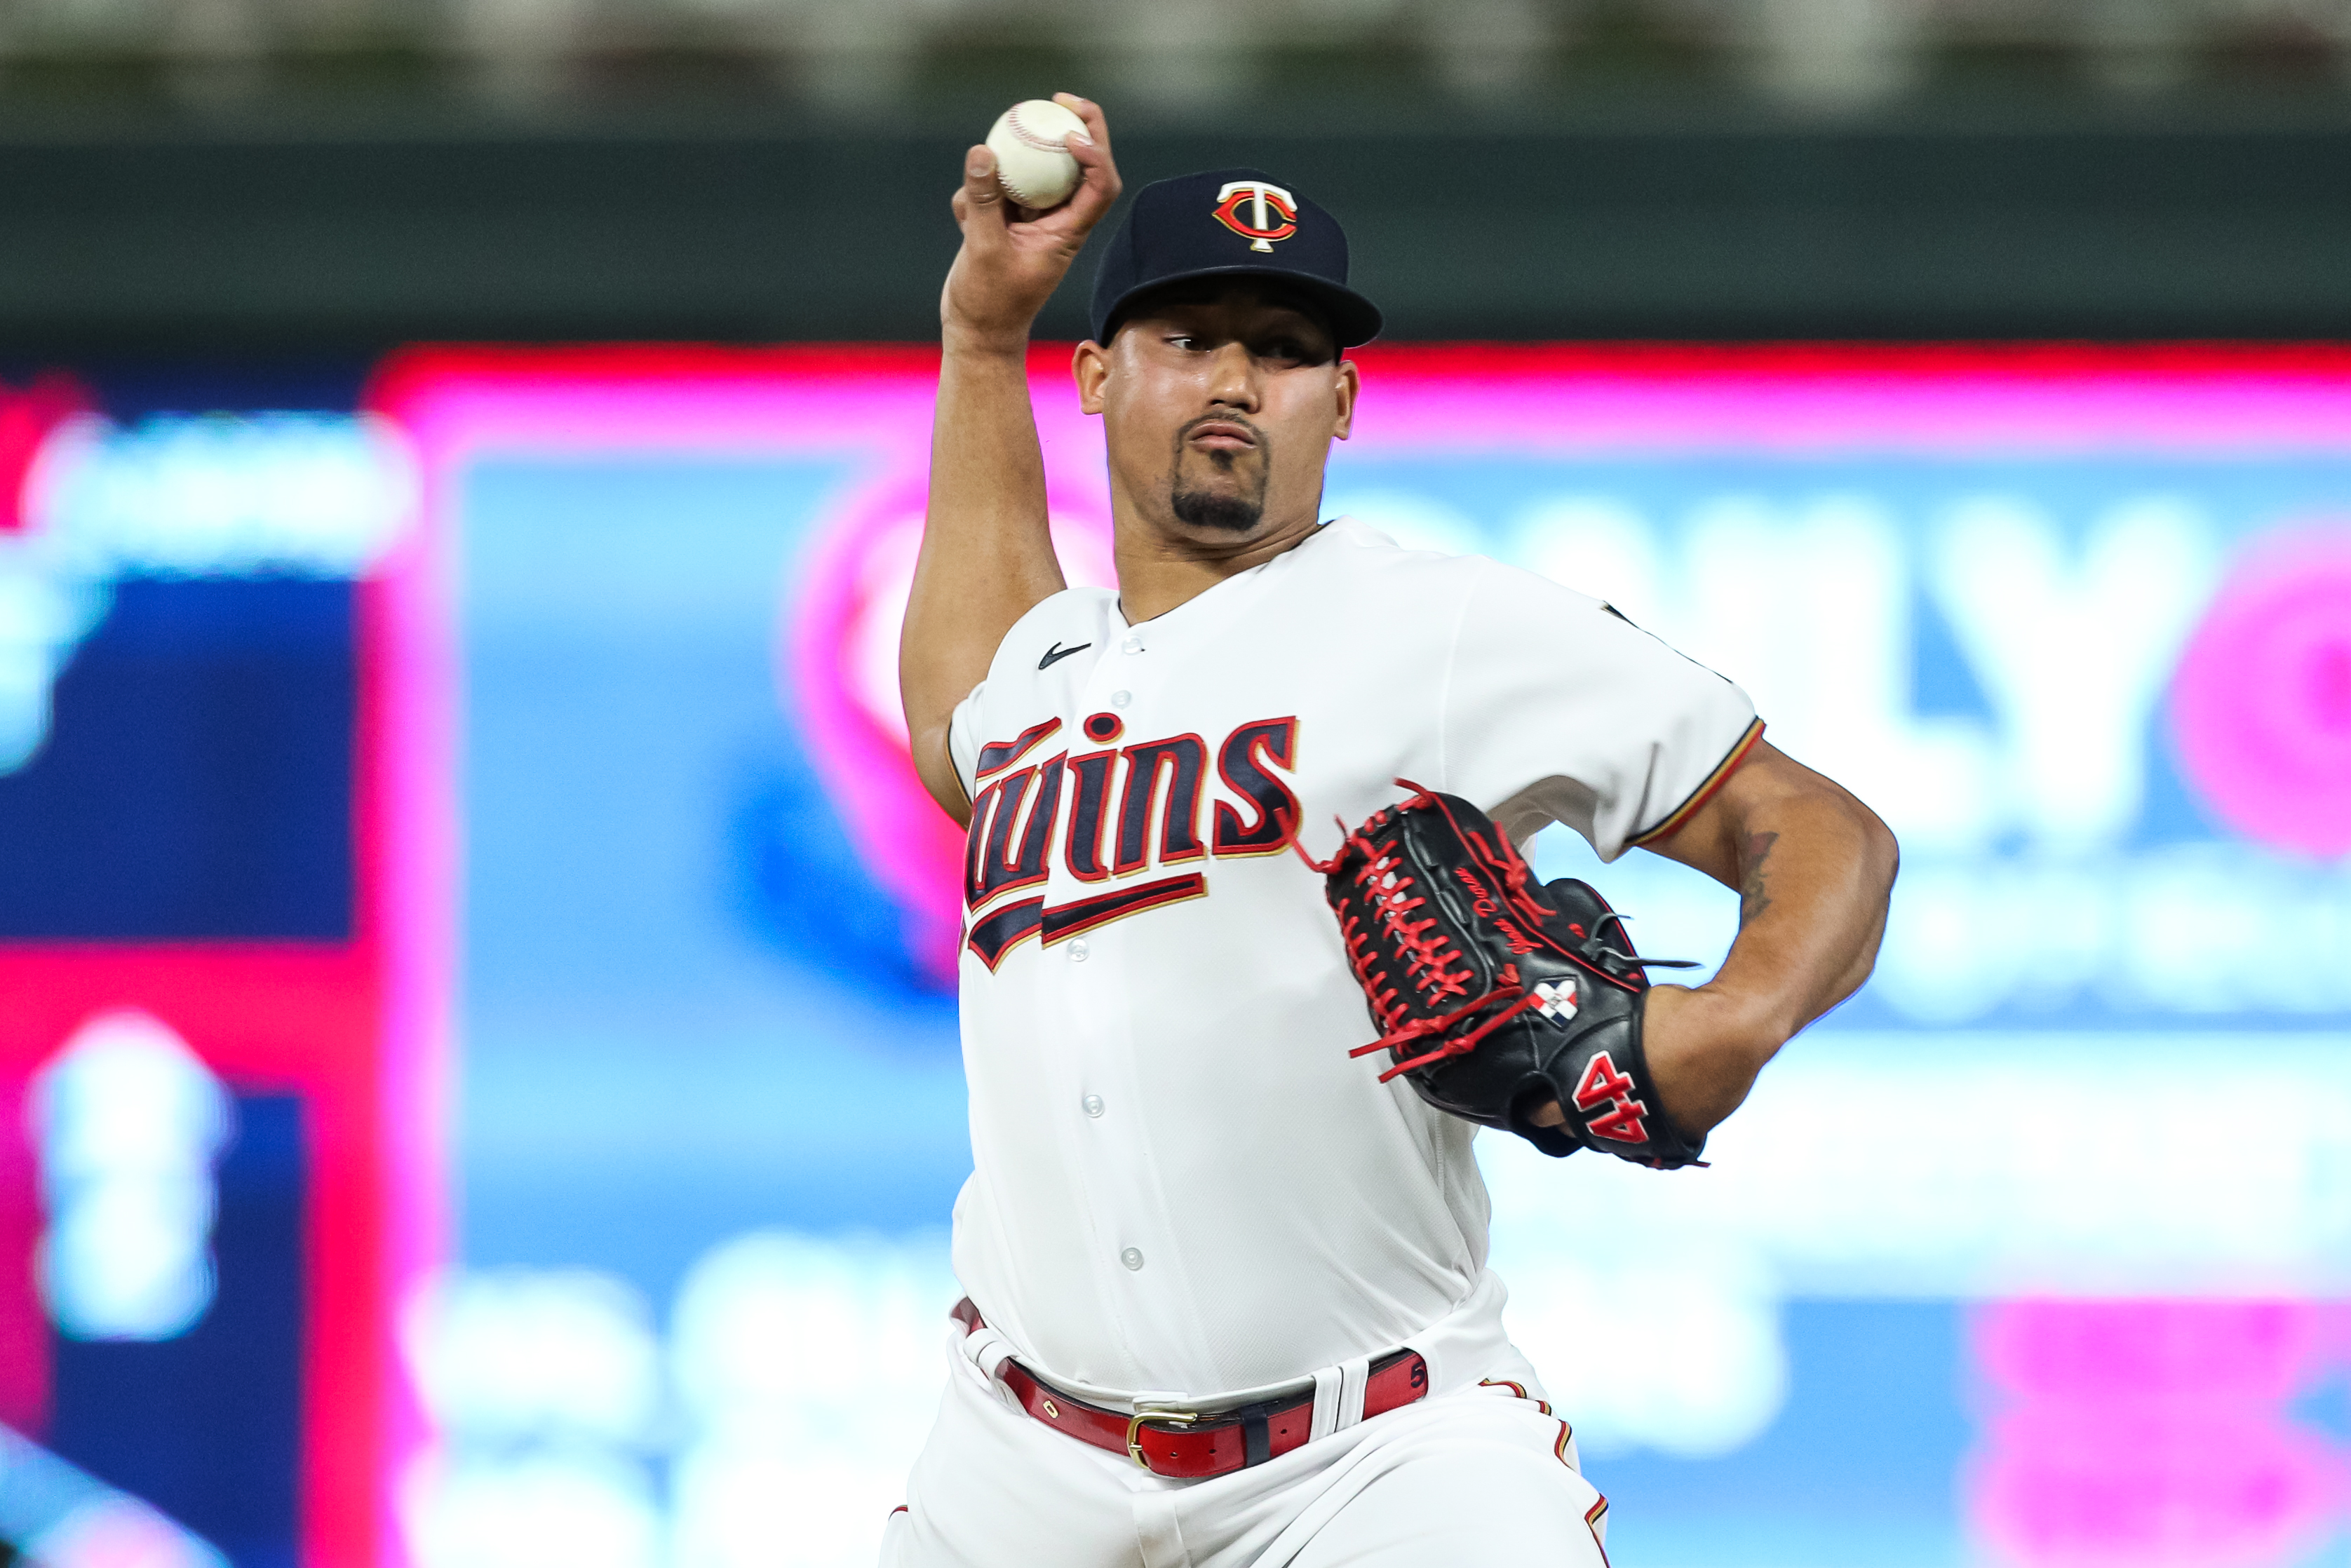 The Twins' Jhoan Duran and his 'splinker' pitch are fast becoming concerns  for major league hitters - The Boston Globe